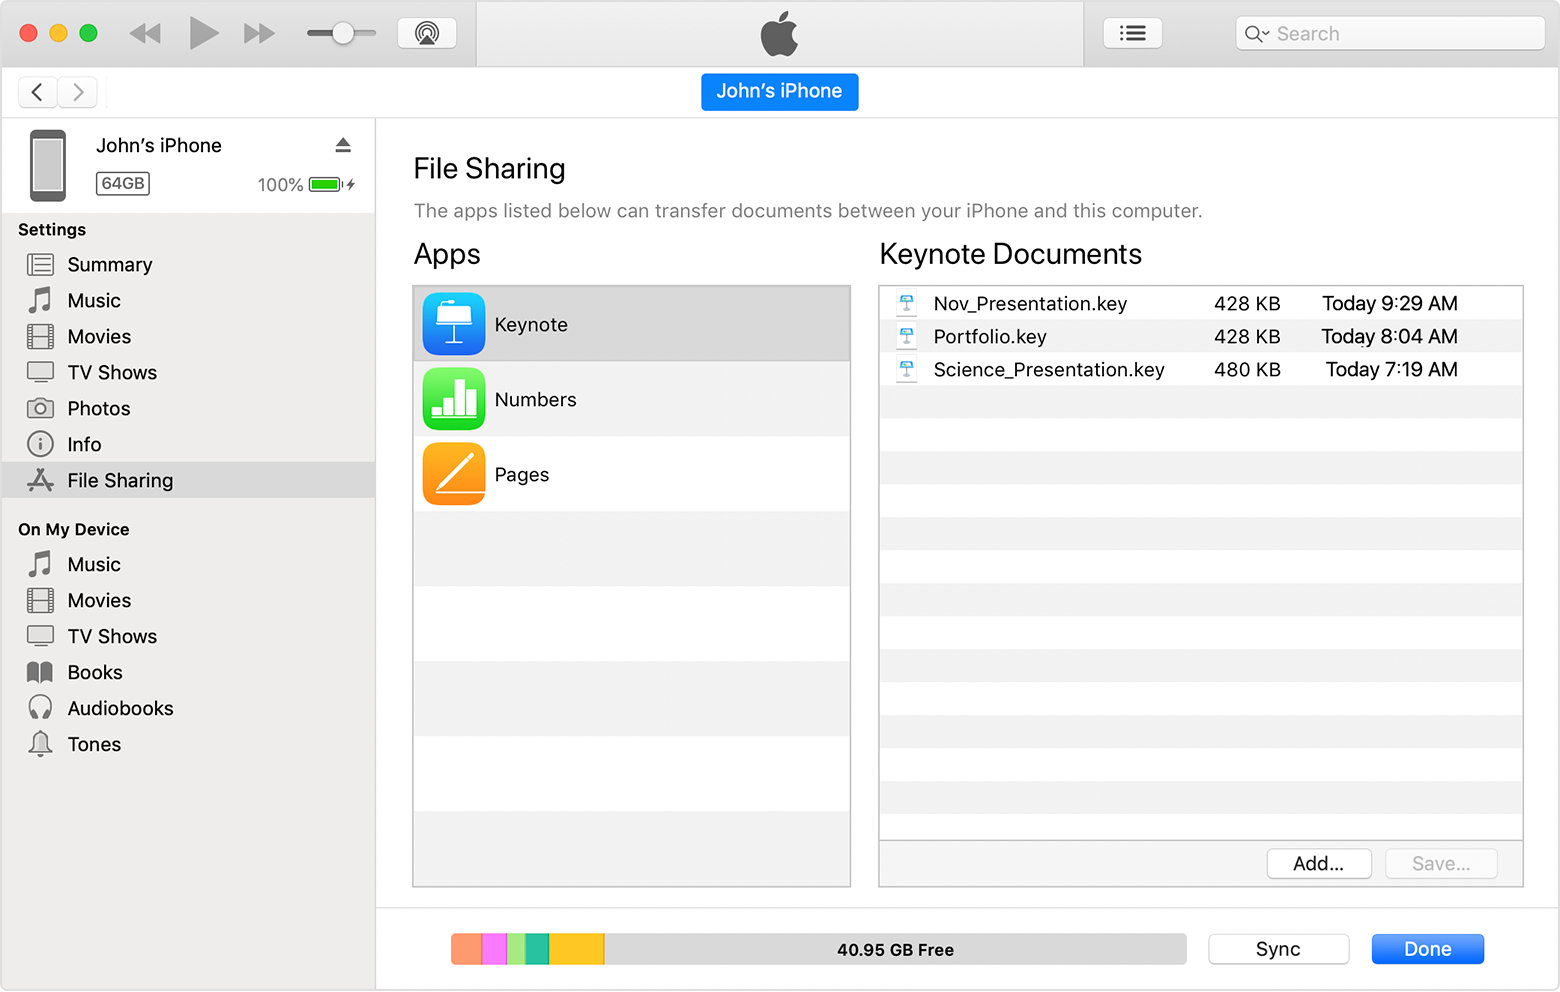 macos-mojave-itunes-iphone12-pro-connected-file-sharing-documents-list.png